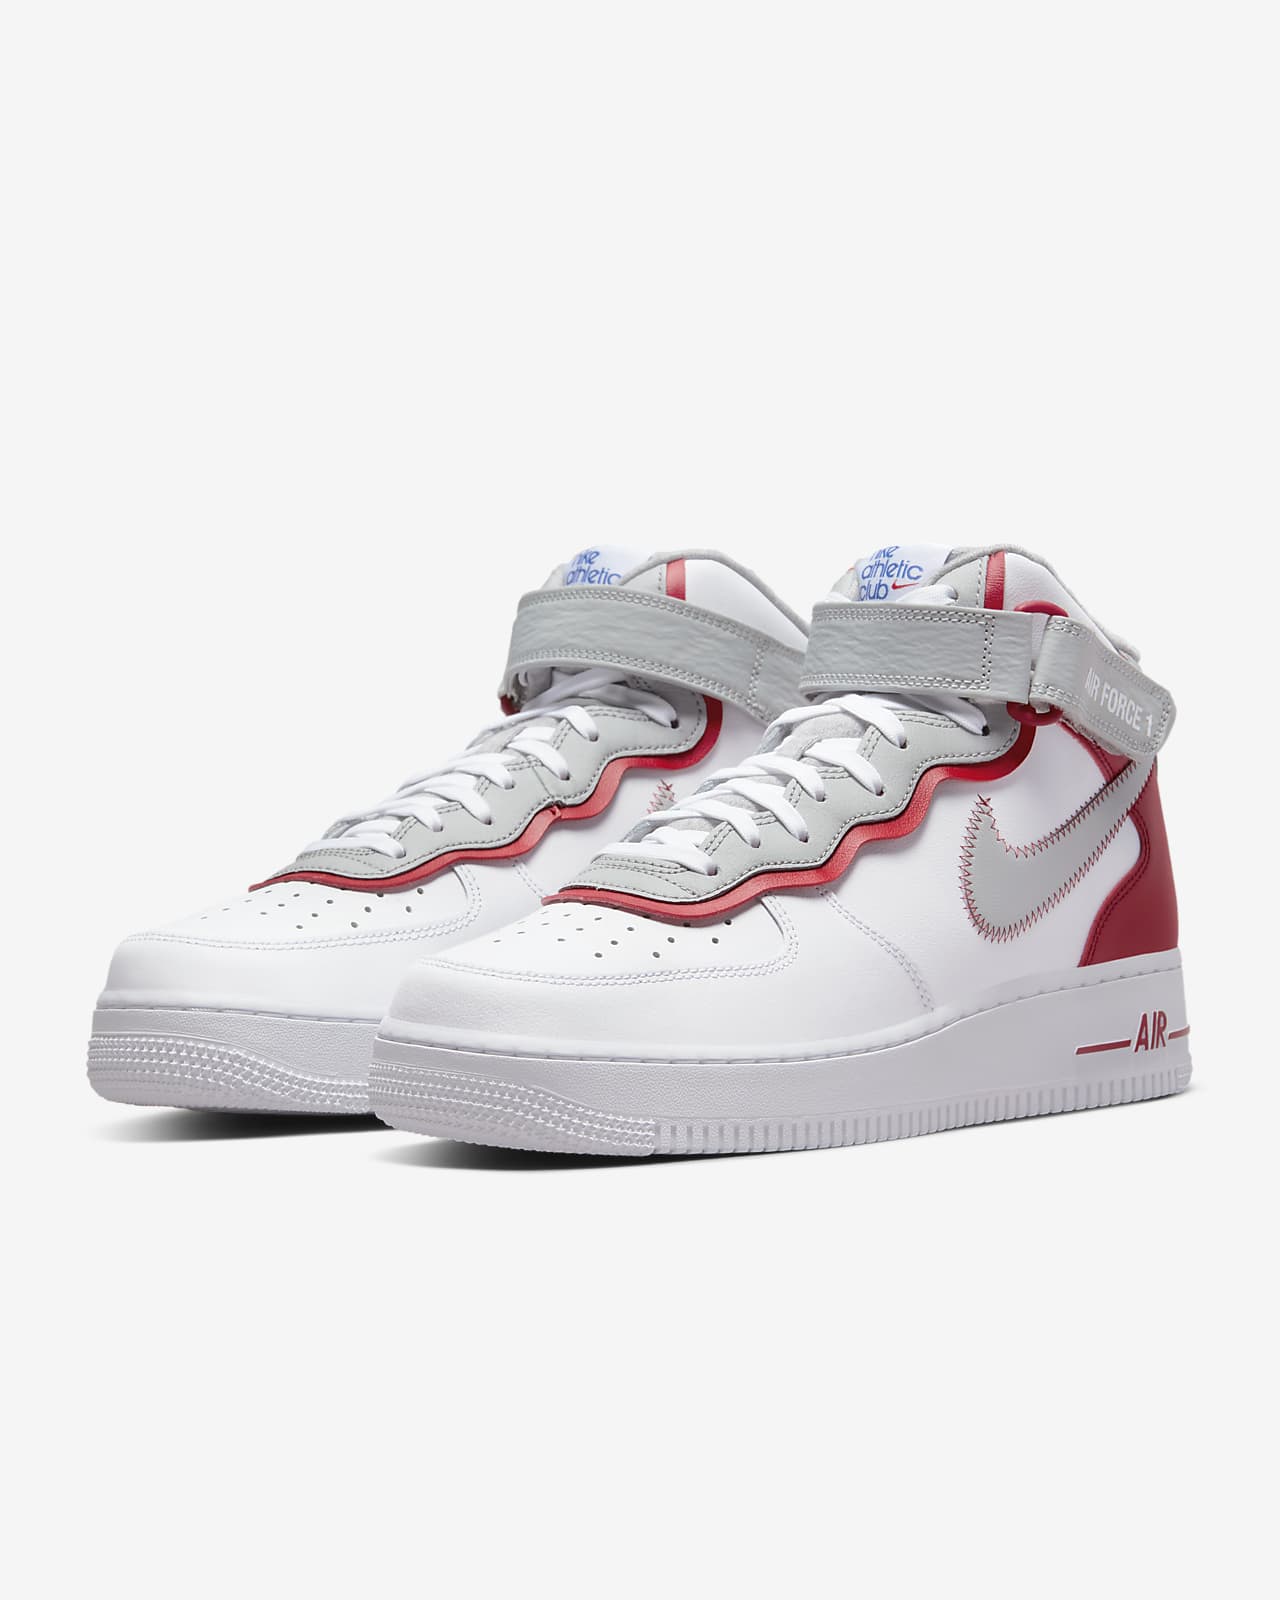 af1 07 lv8 white, significant trade Save 57% available 